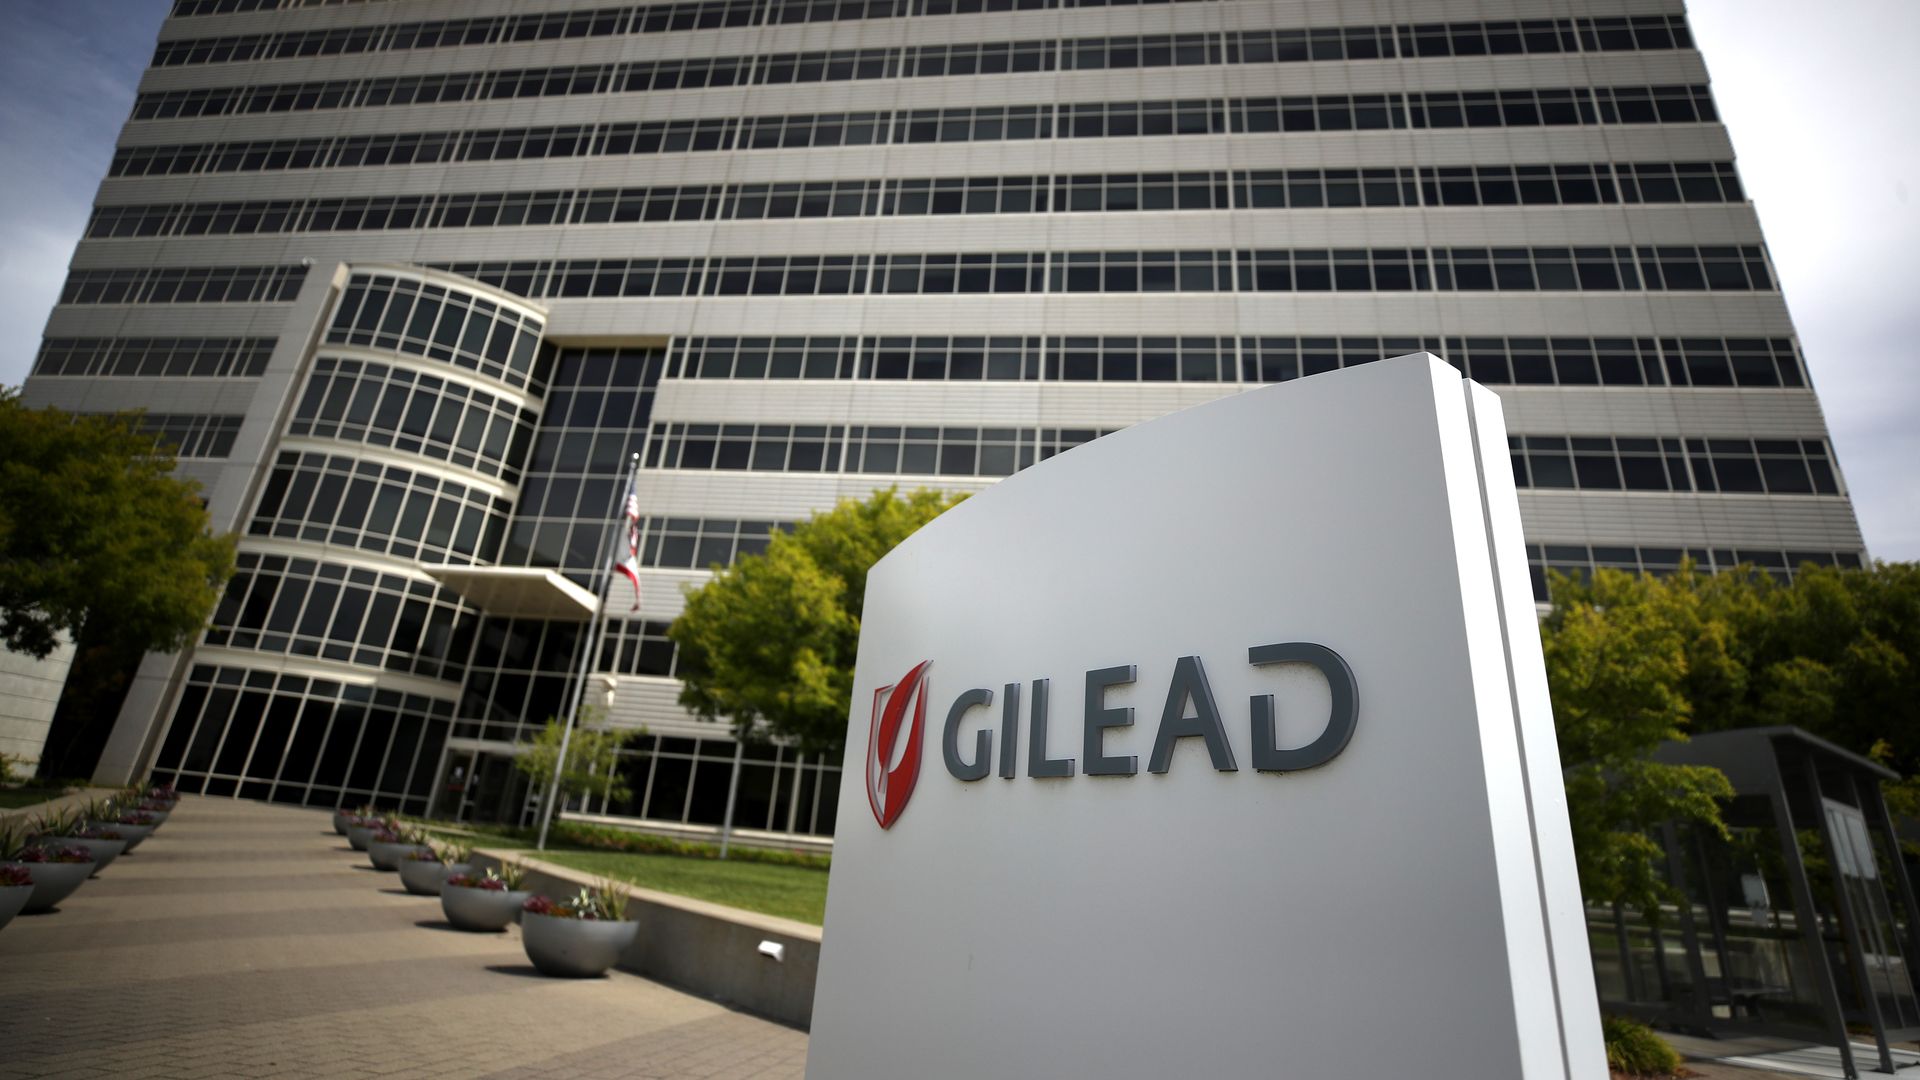 Gilead's logo outside of its headquarters building.